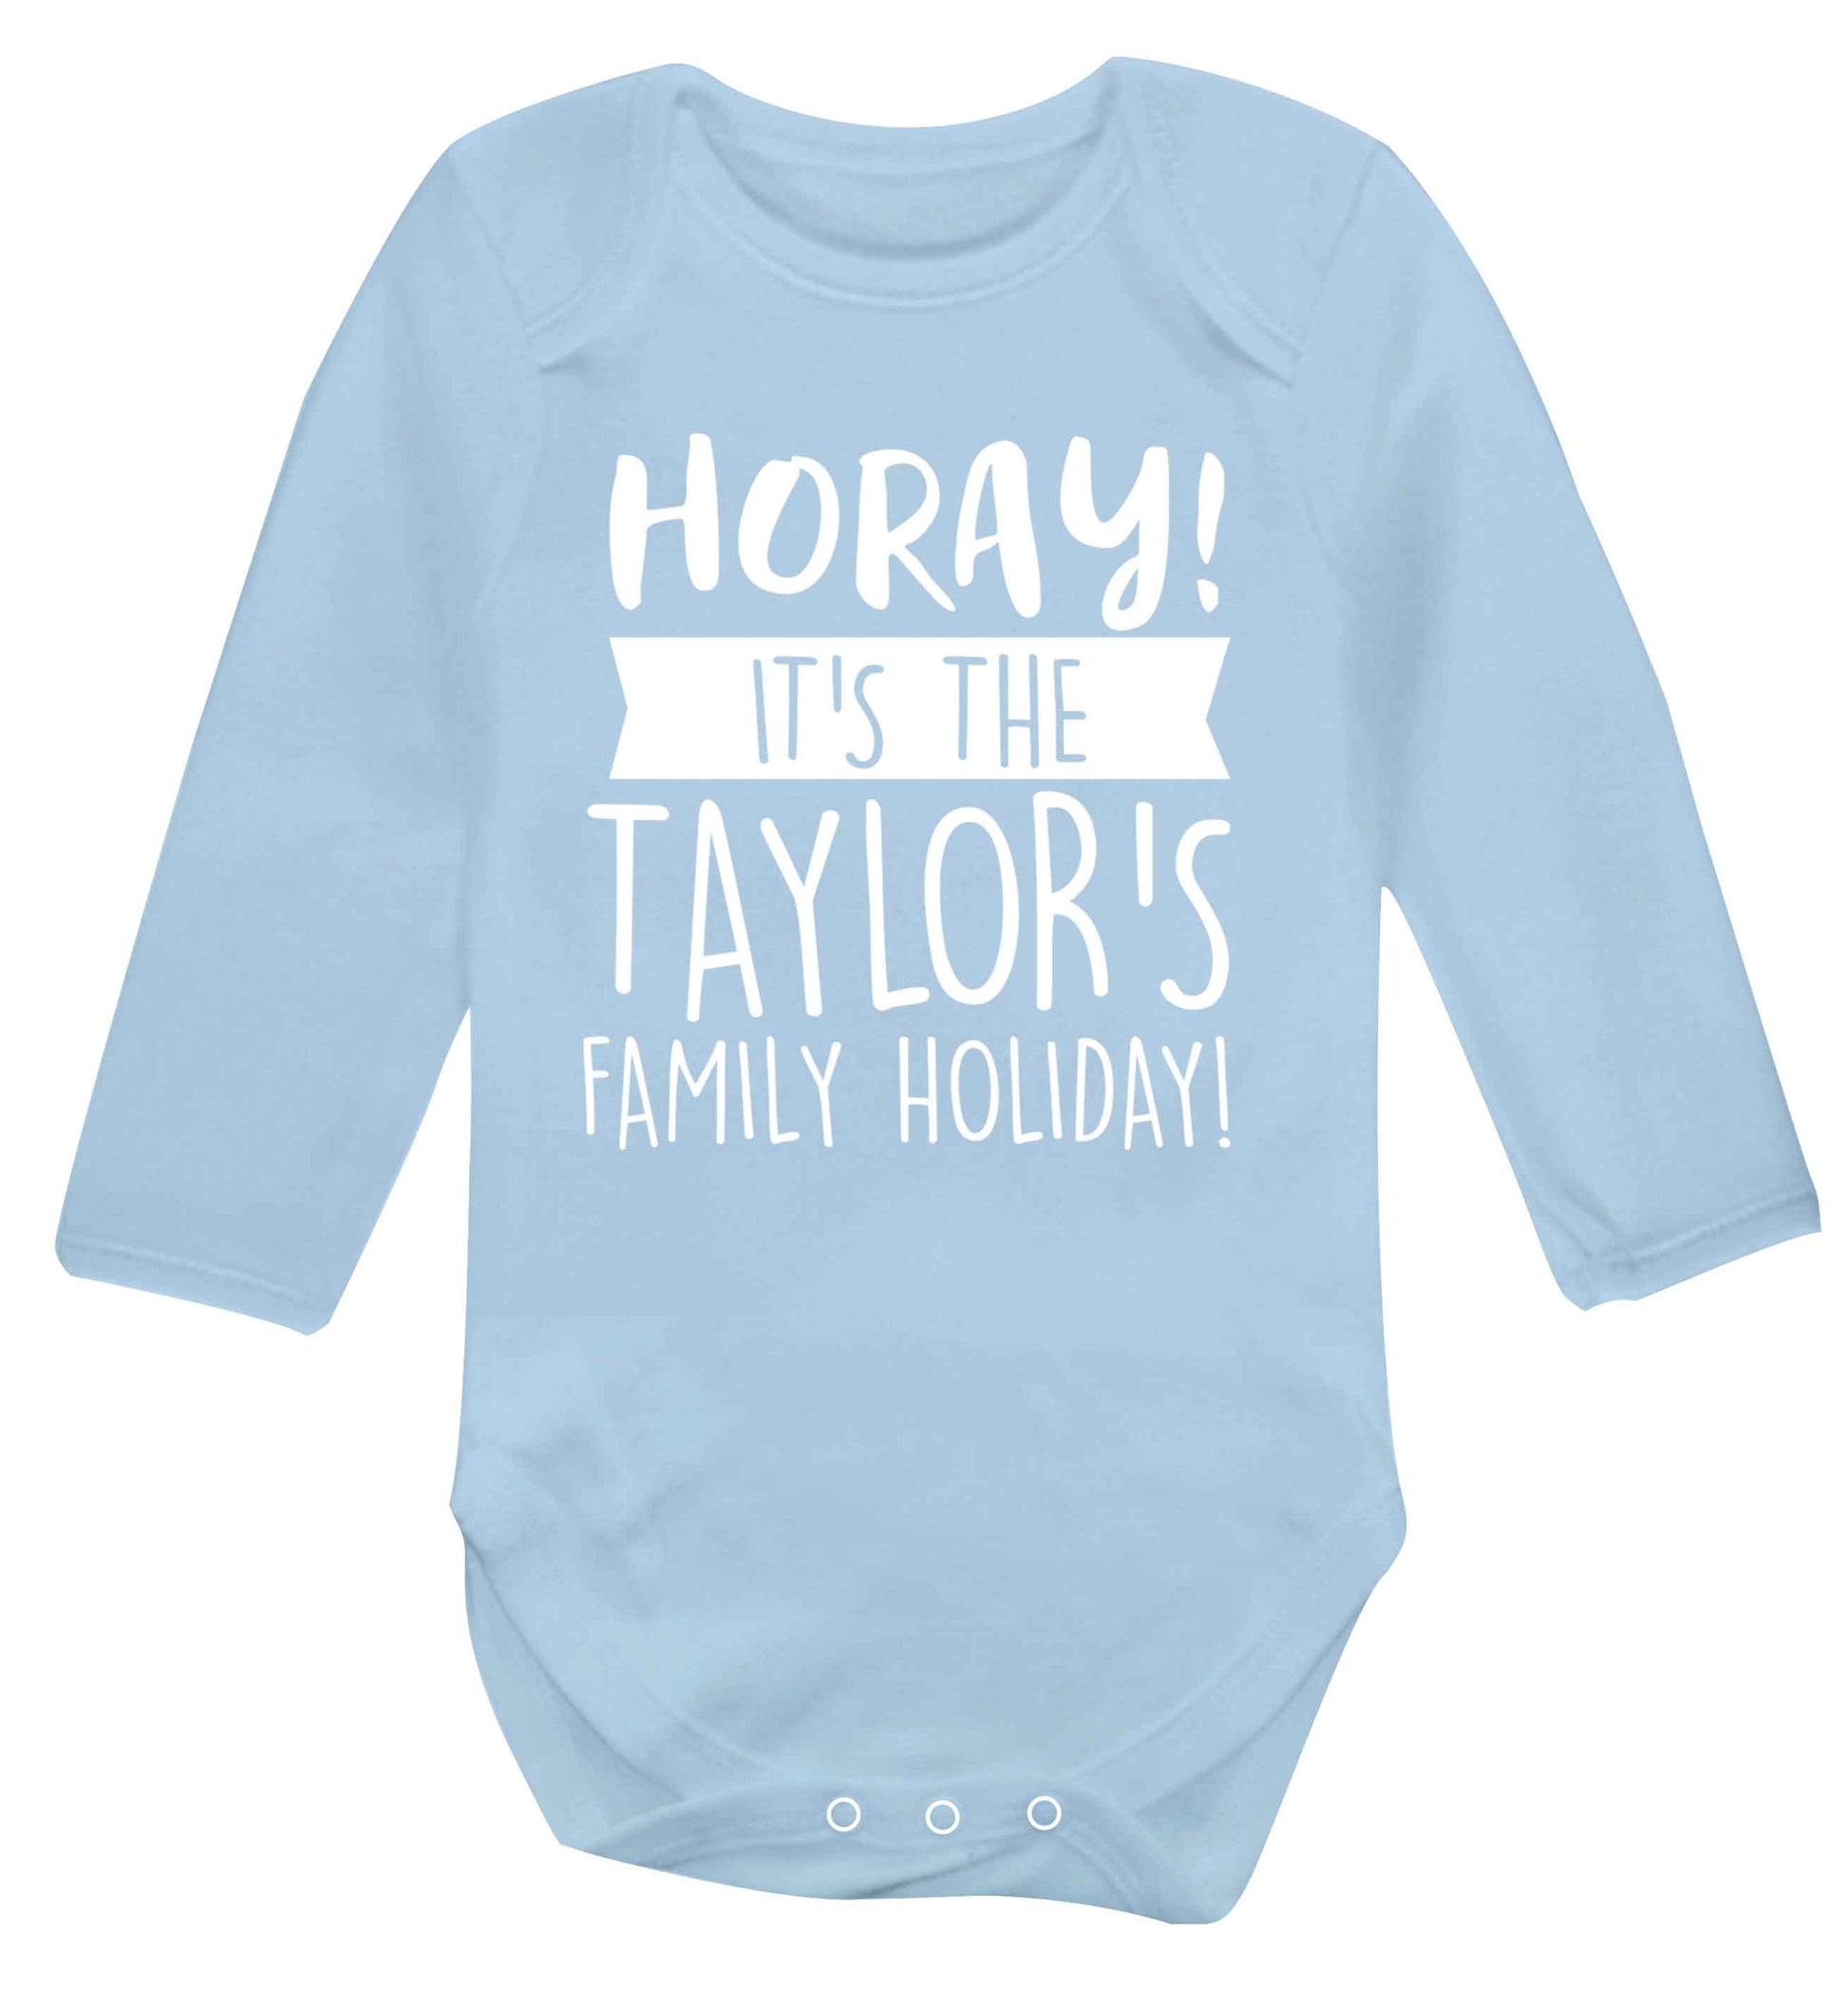 Horay it's the Taylor's family holiday! personalised item Baby Vest long sleeved pale blue 6-12 months